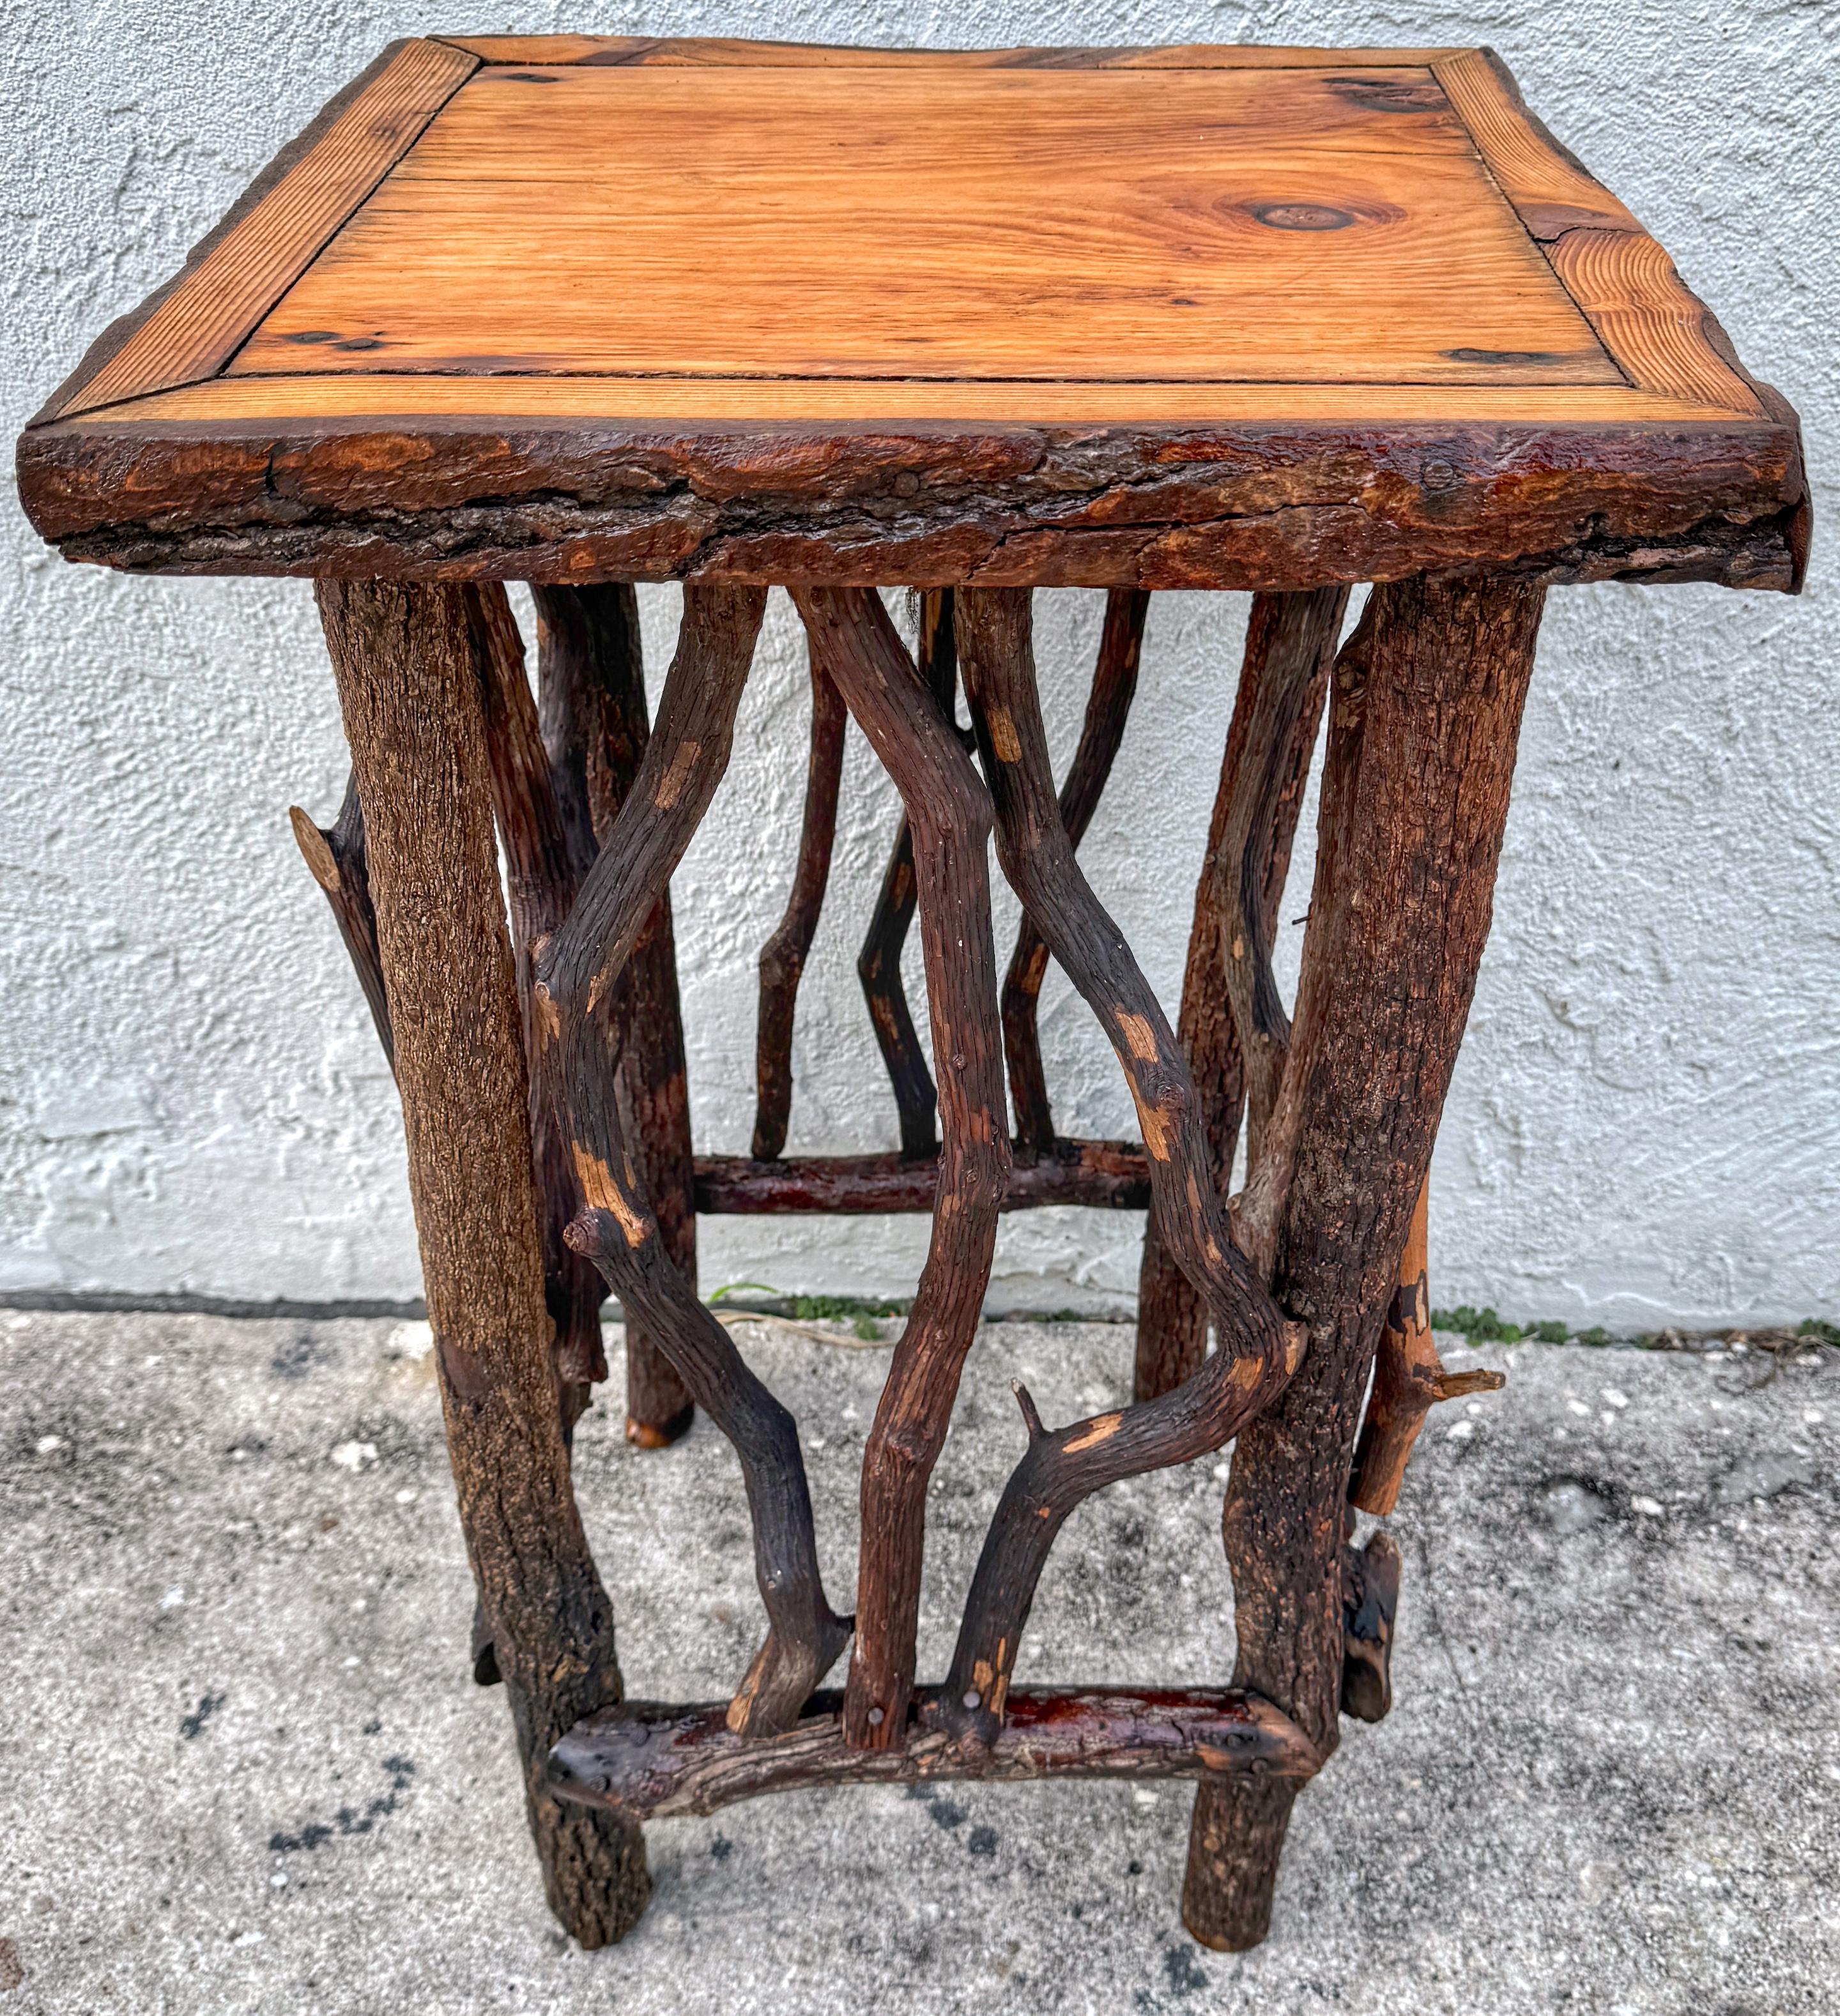 Vintage Adirondack Log and Twig Table/Pedestal with Pine Top
USA, 20th century 

Vintage Adirondack Log & Twig Table/Pedestal, originating from the USA in the 20th century Representing quintessential American Adirondack furniture, this piece stands